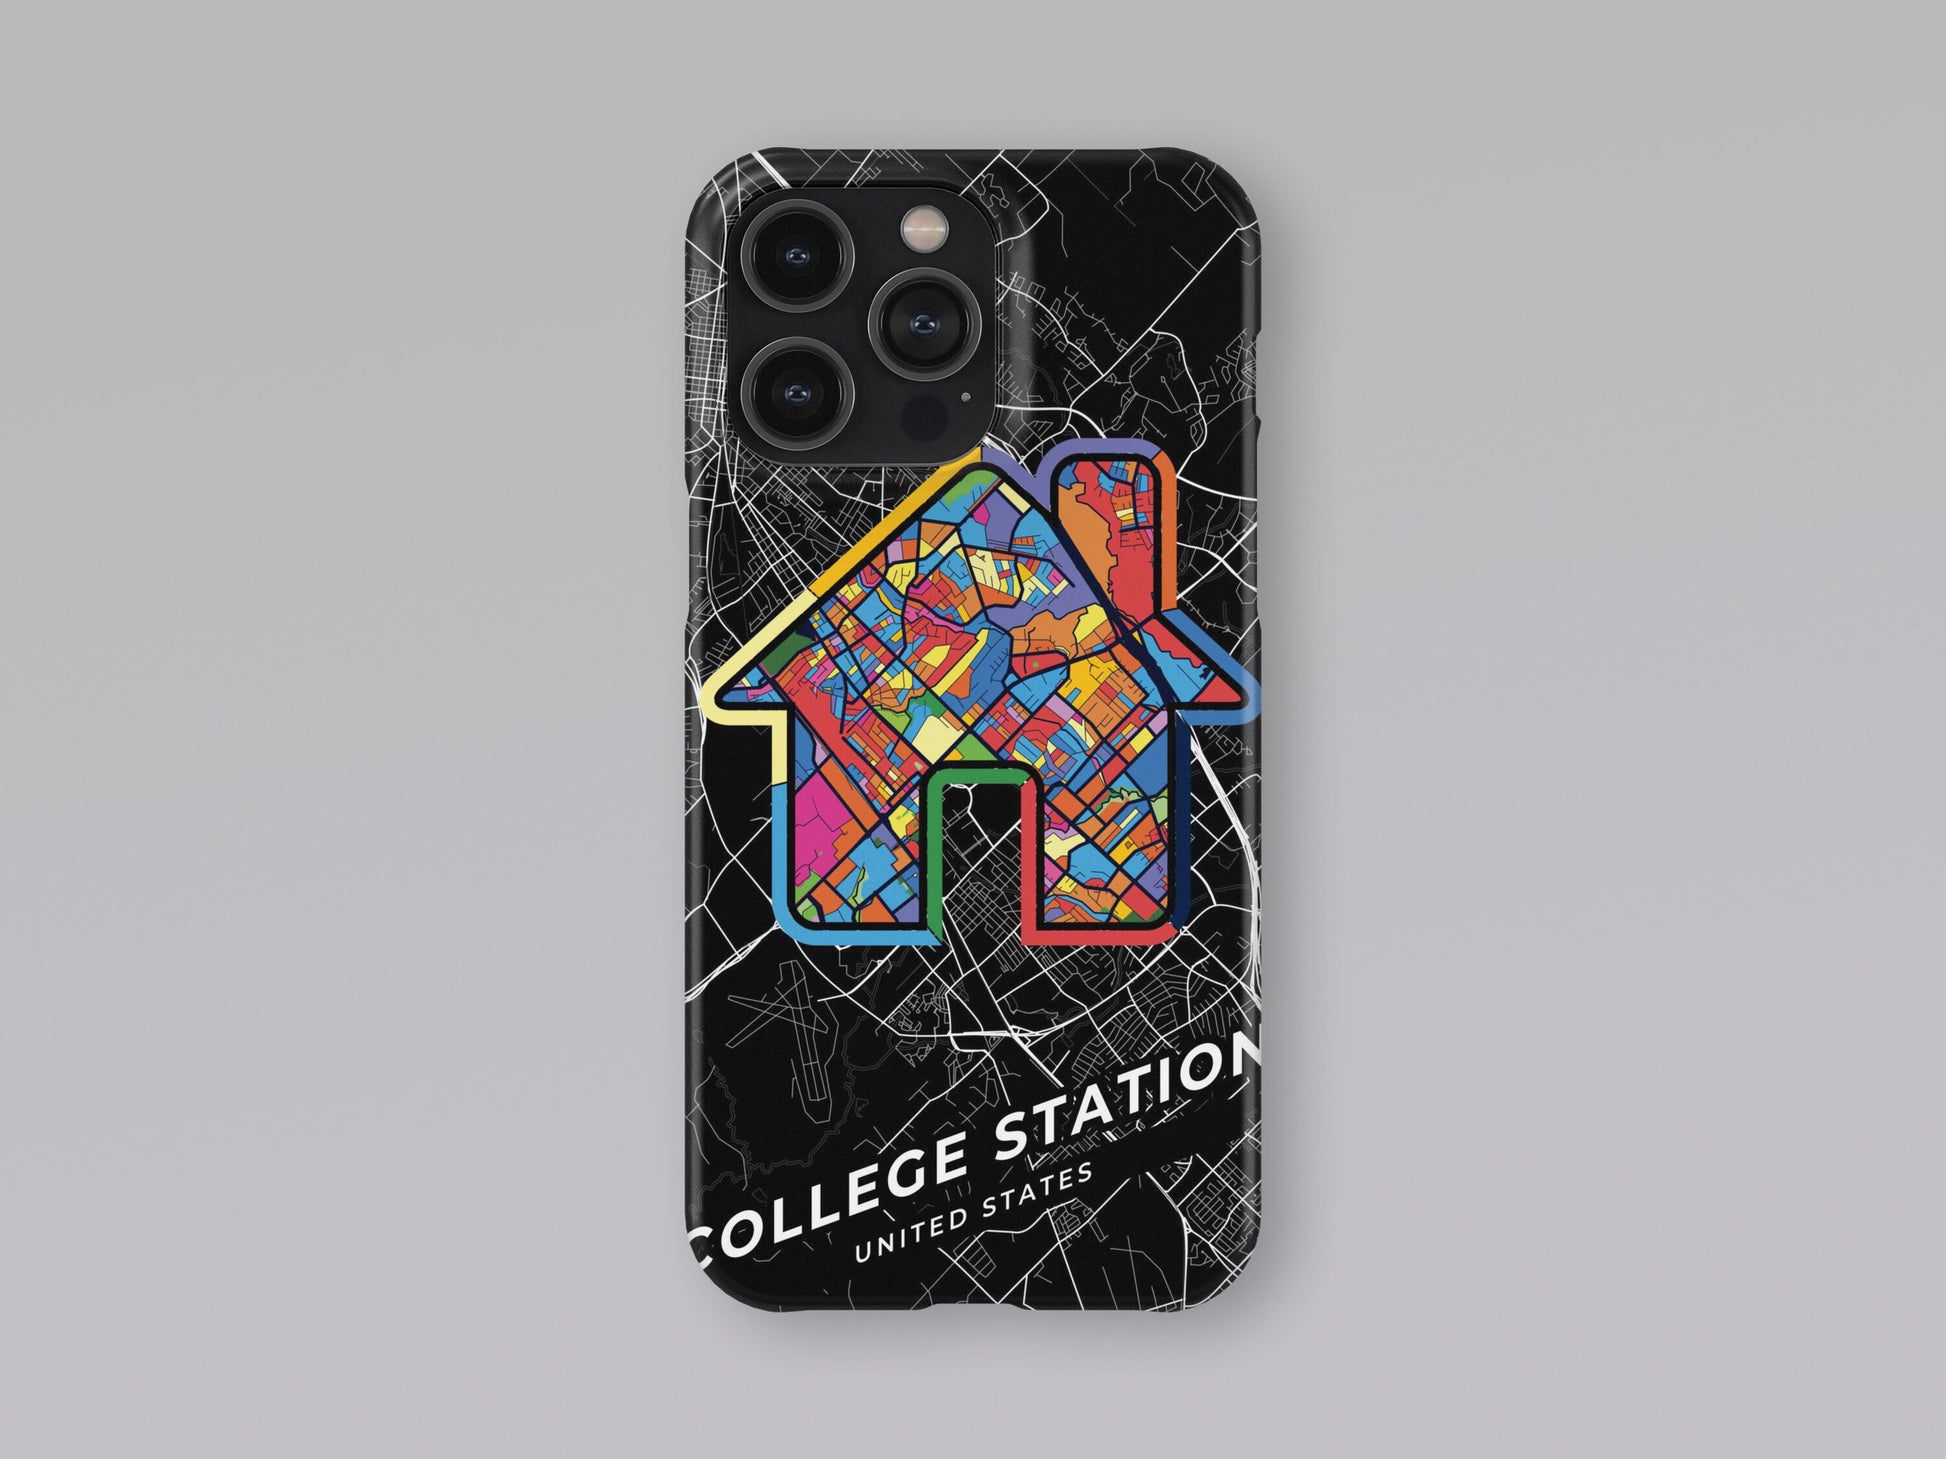 College Station Texas slim phone case with colorful icon. Birthday, wedding or housewarming gift. Couple match cases. 3